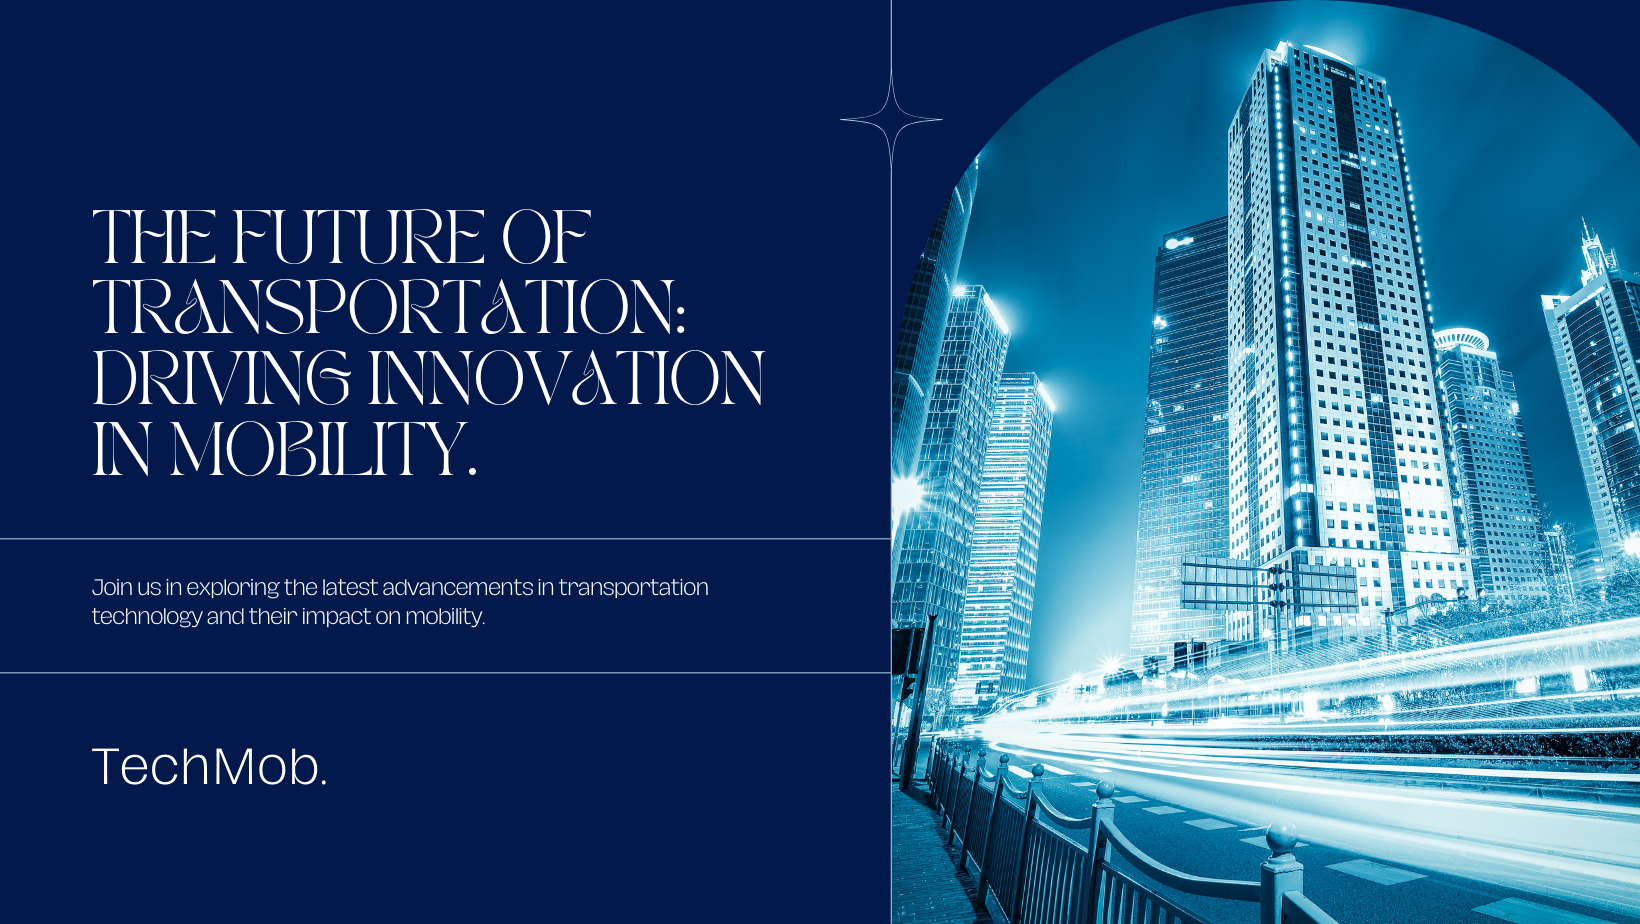 The Future of Transportation: How Technology is Driving Innovation in Mobility